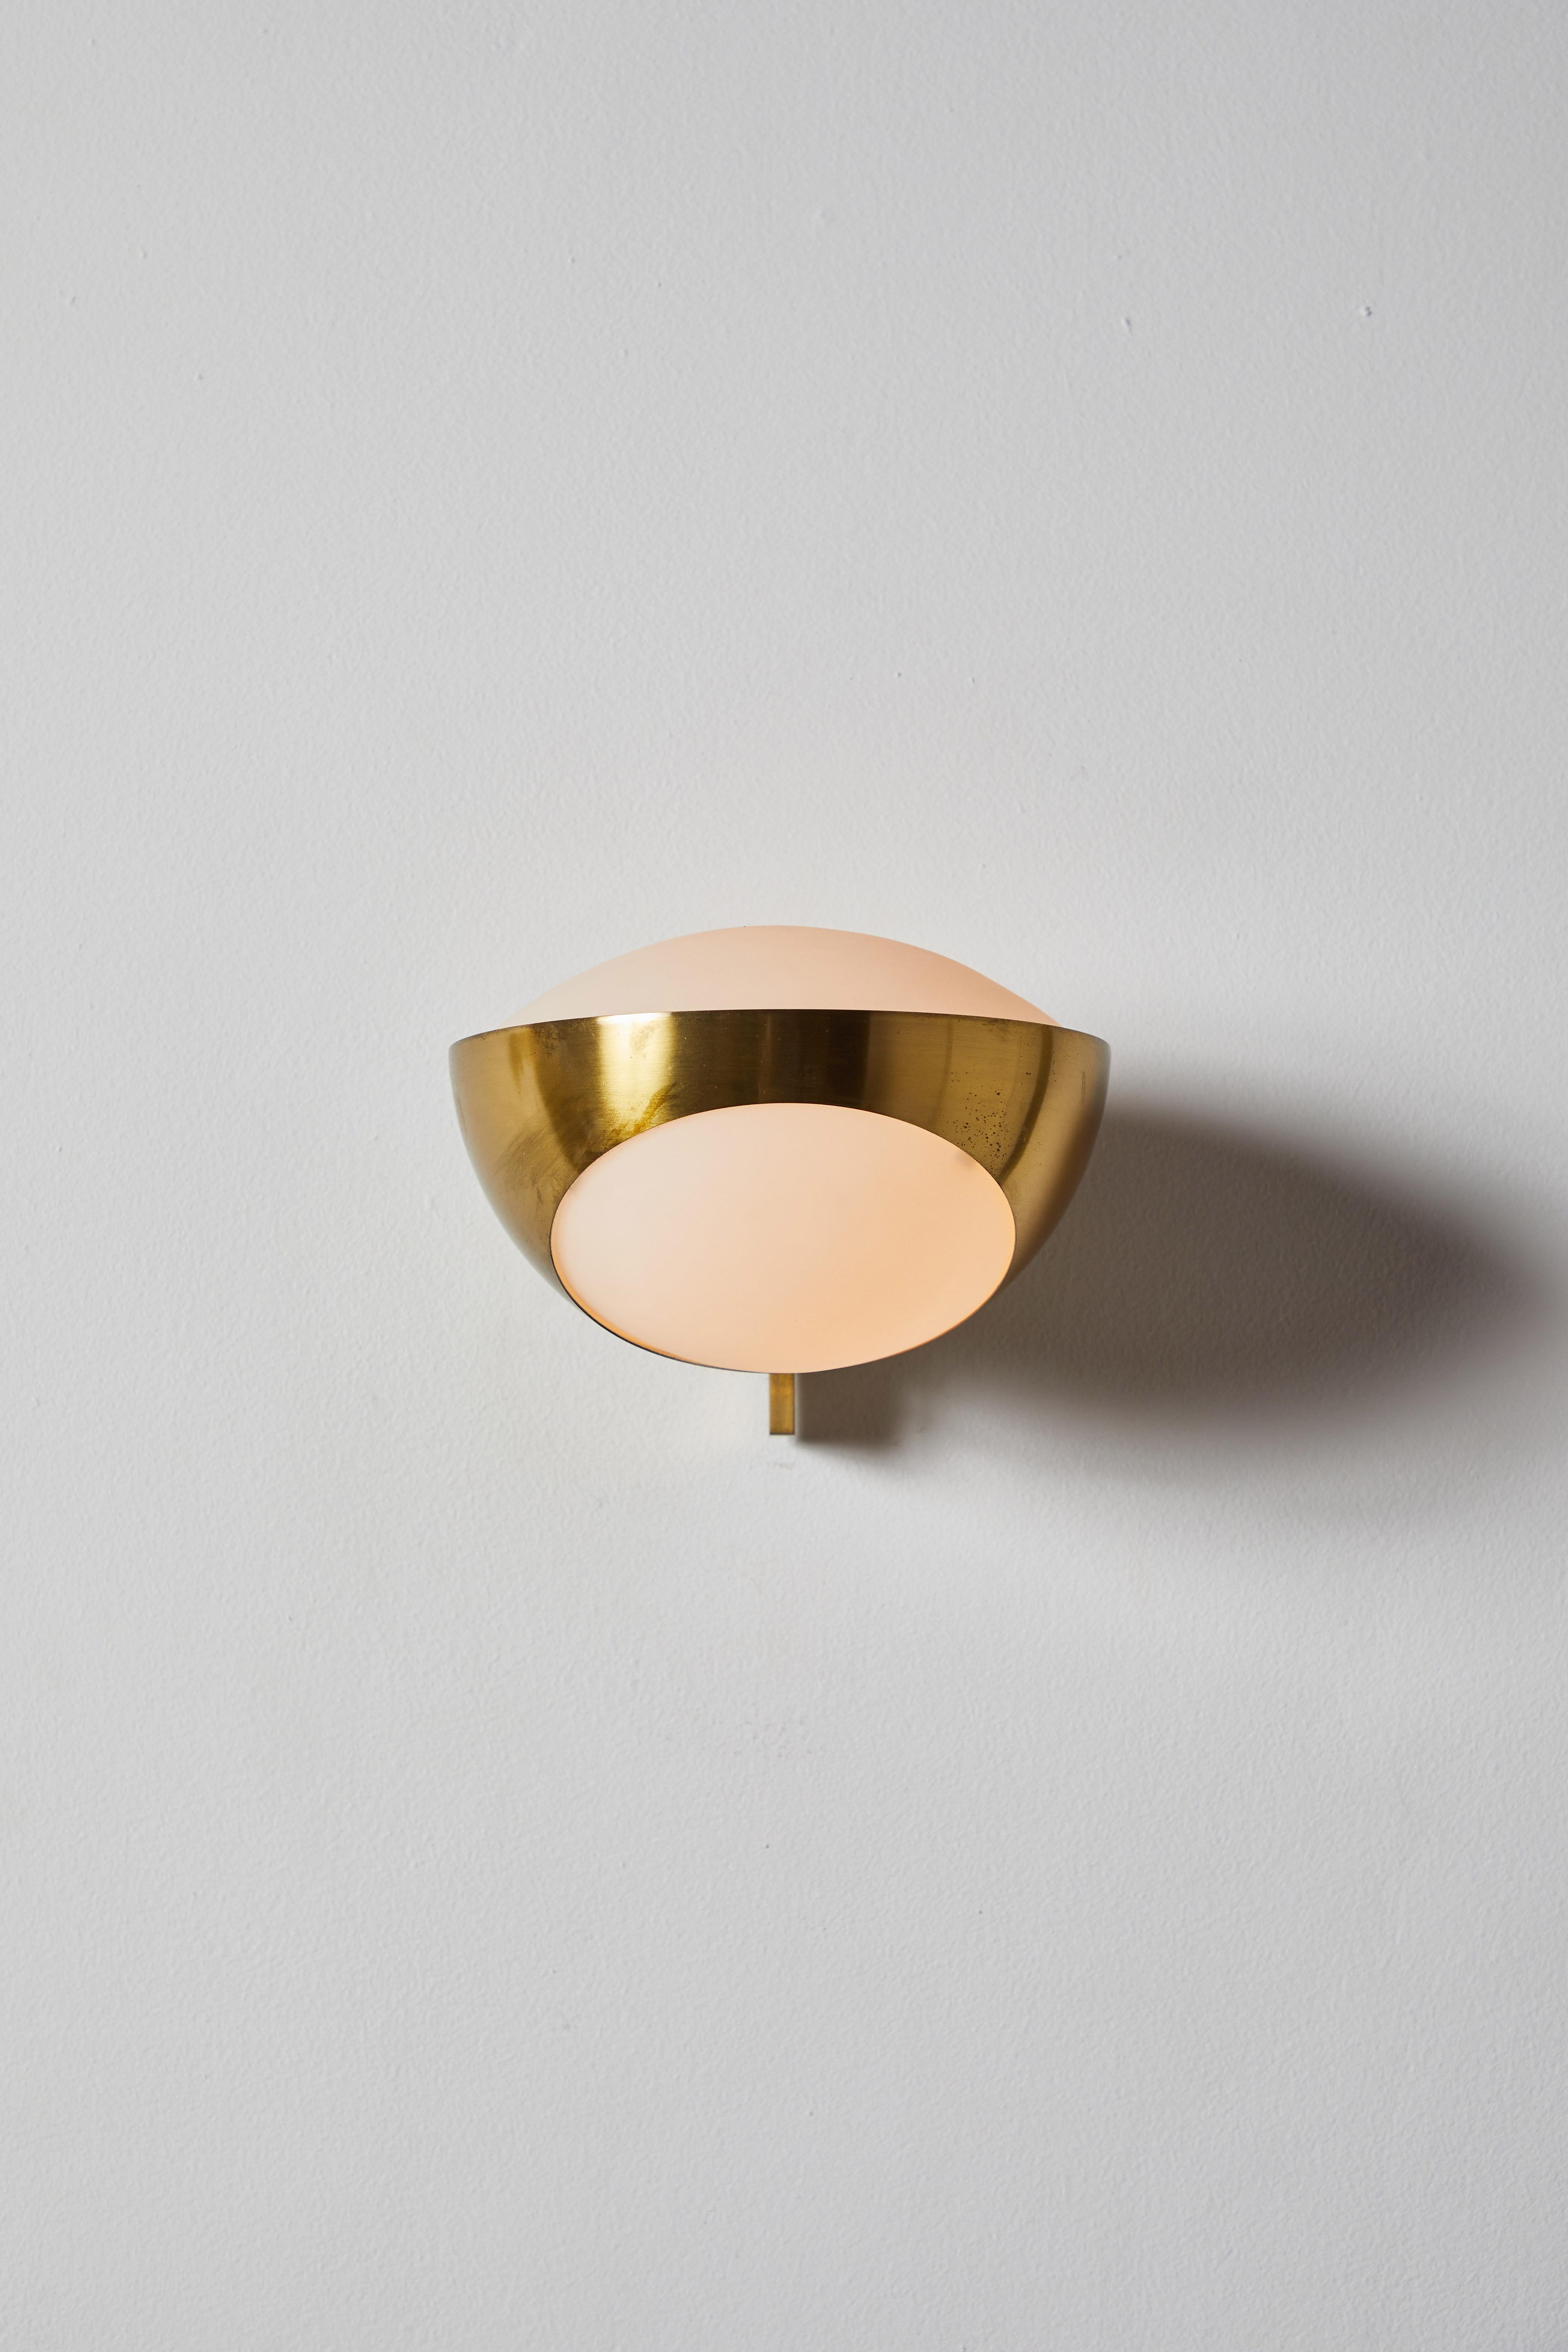 Model No. 1963 Sconce by Max Ingrand for Fontanta Arte In Good Condition In Los Angeles, CA